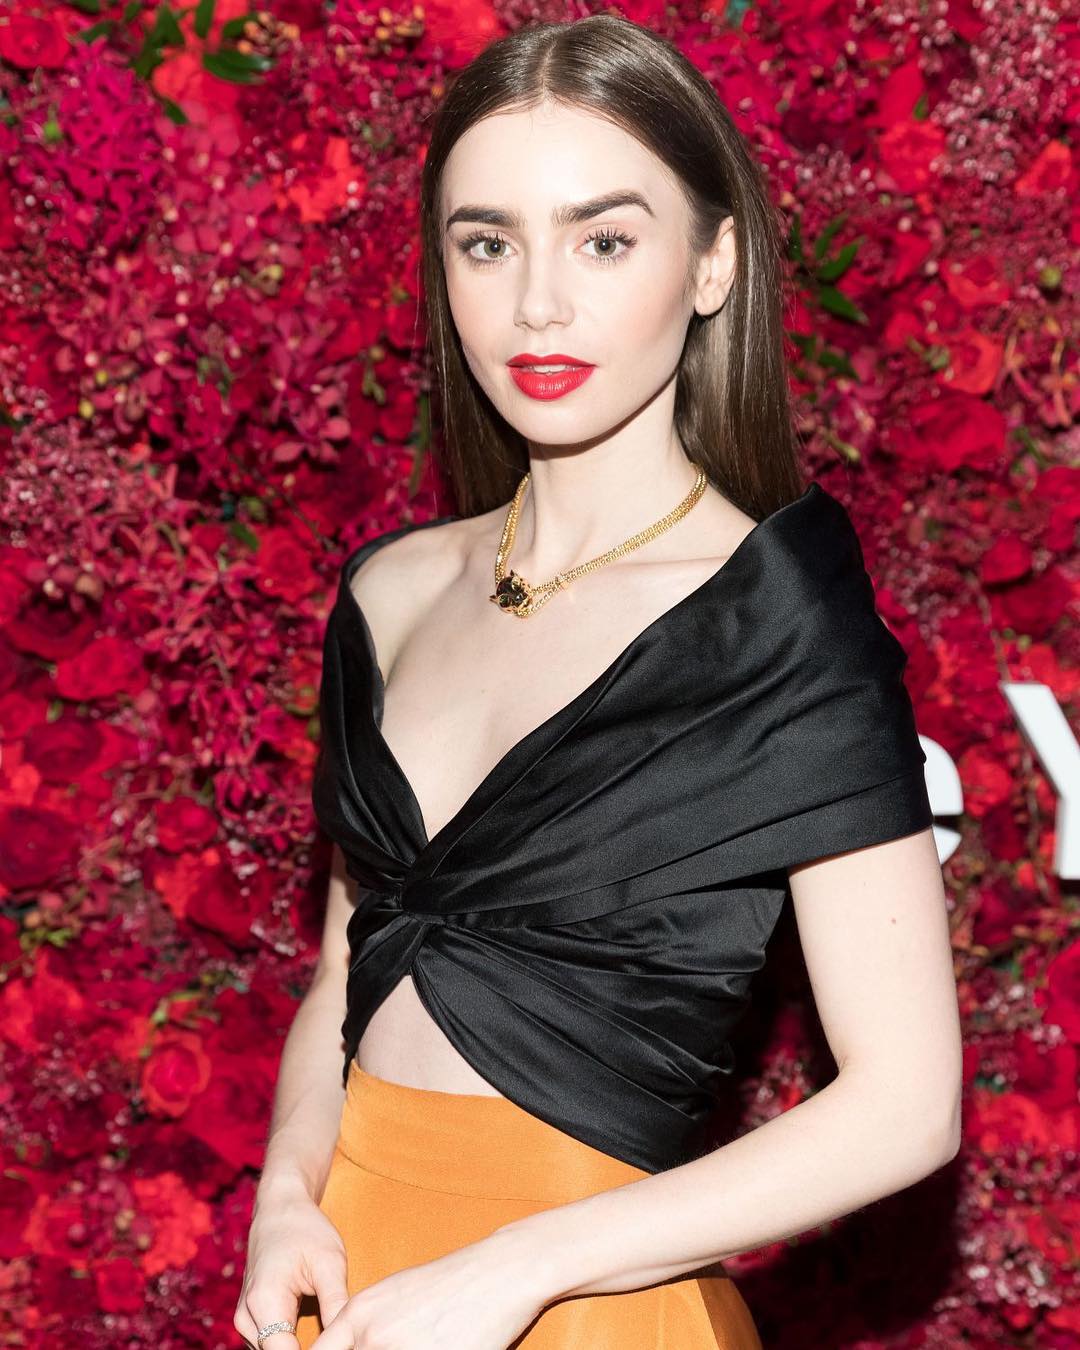 Lily Collins Red Lips